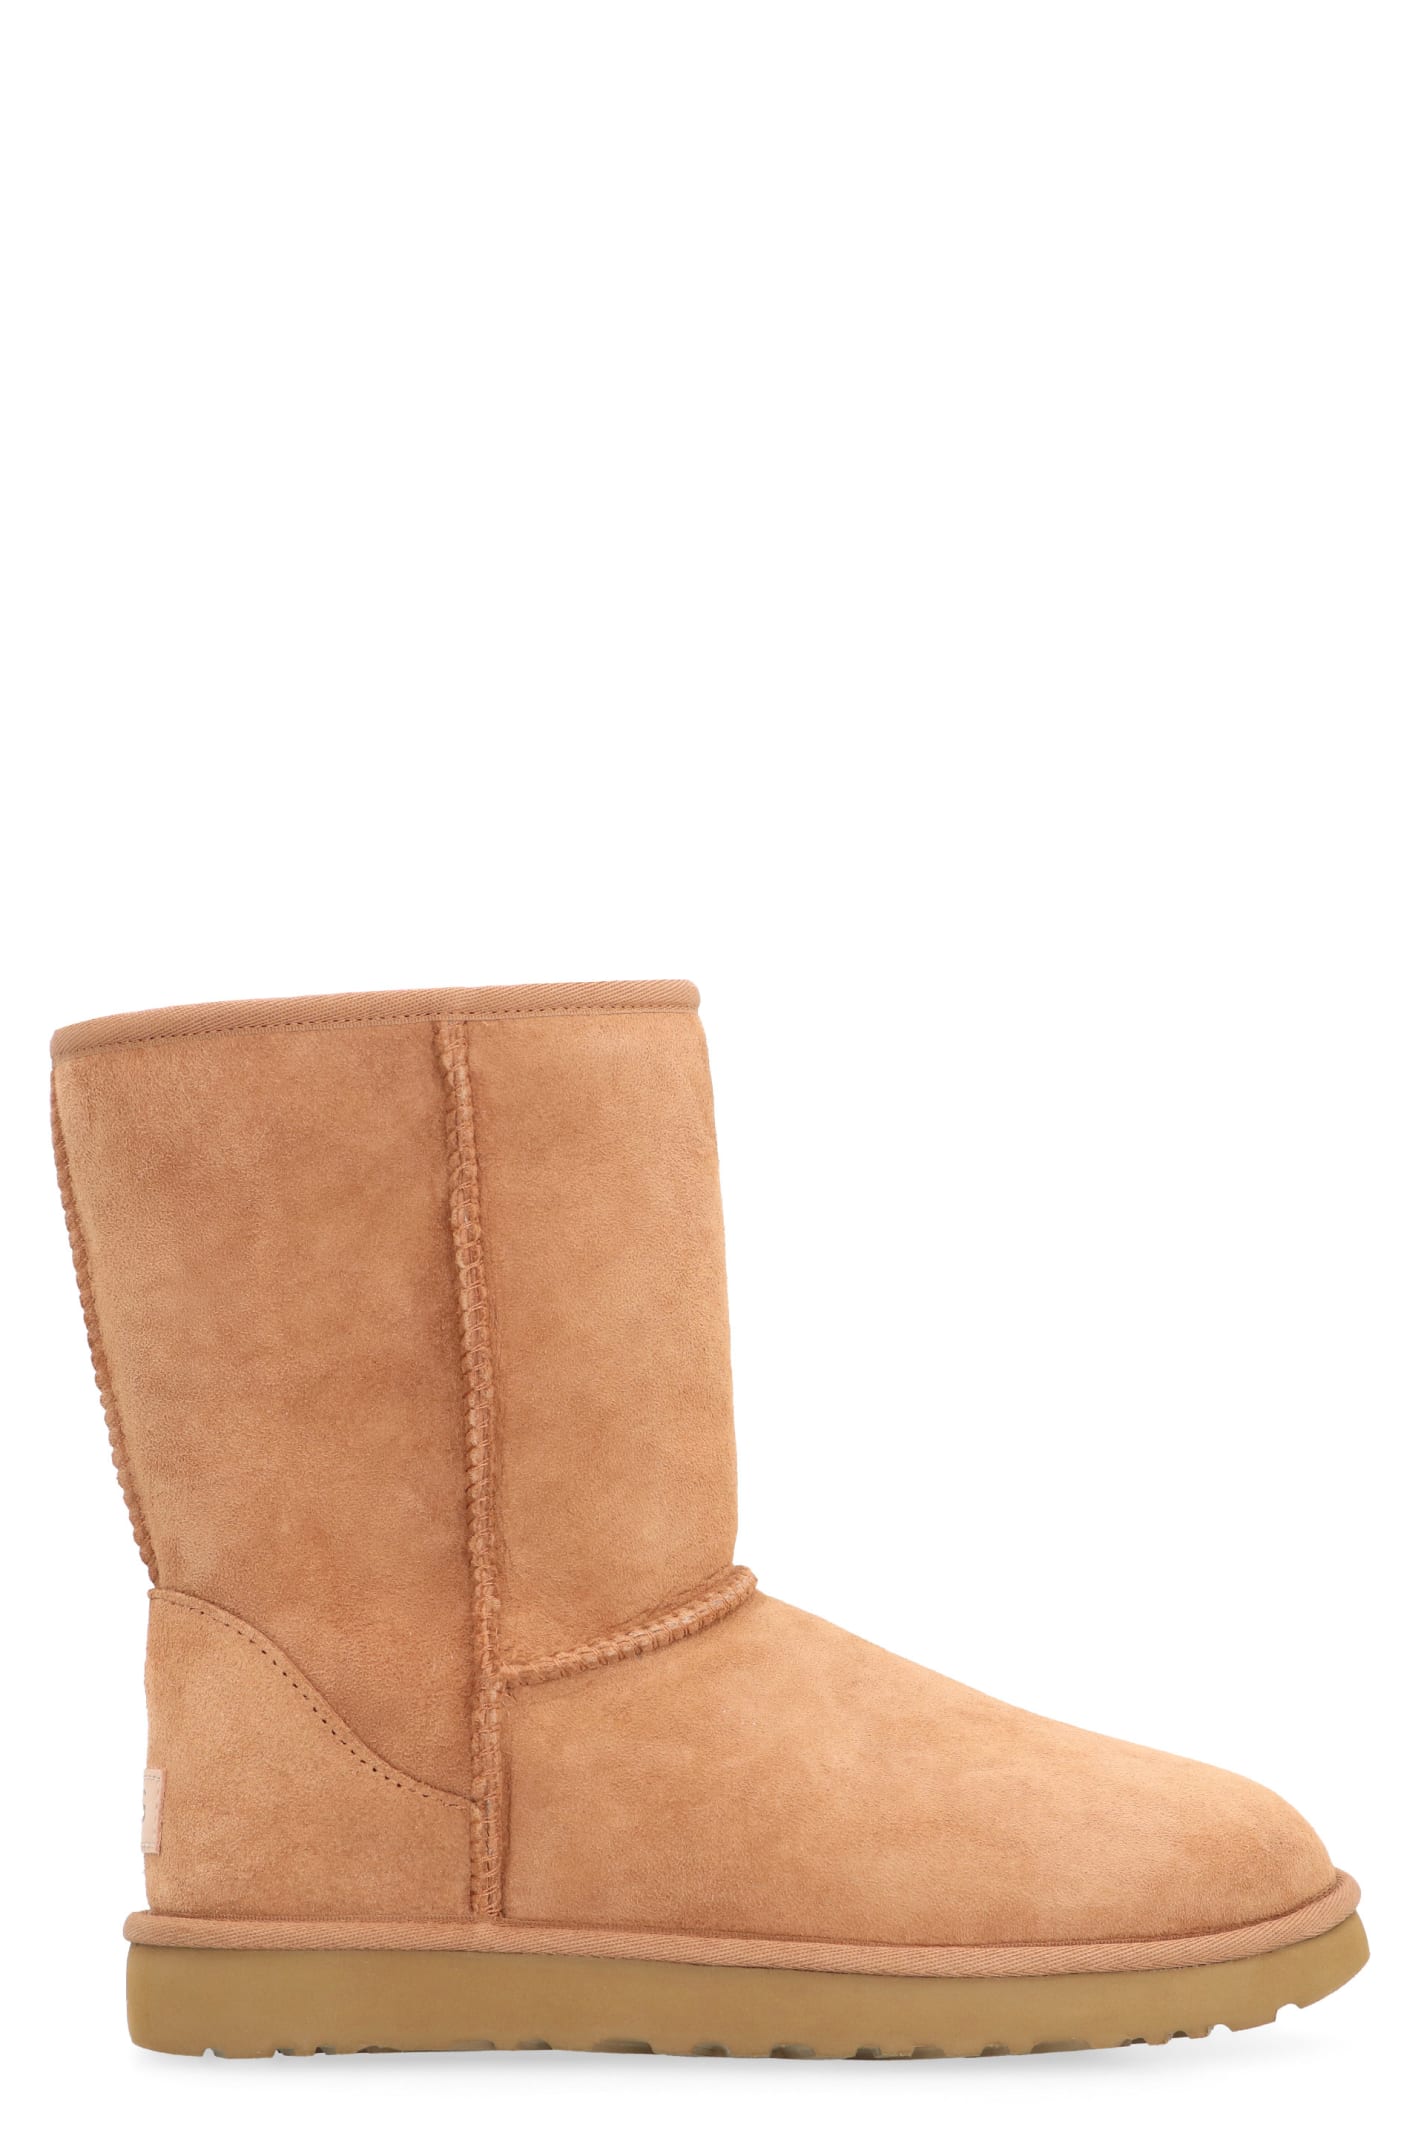 UGG Classic Short Ii Ankle Boots